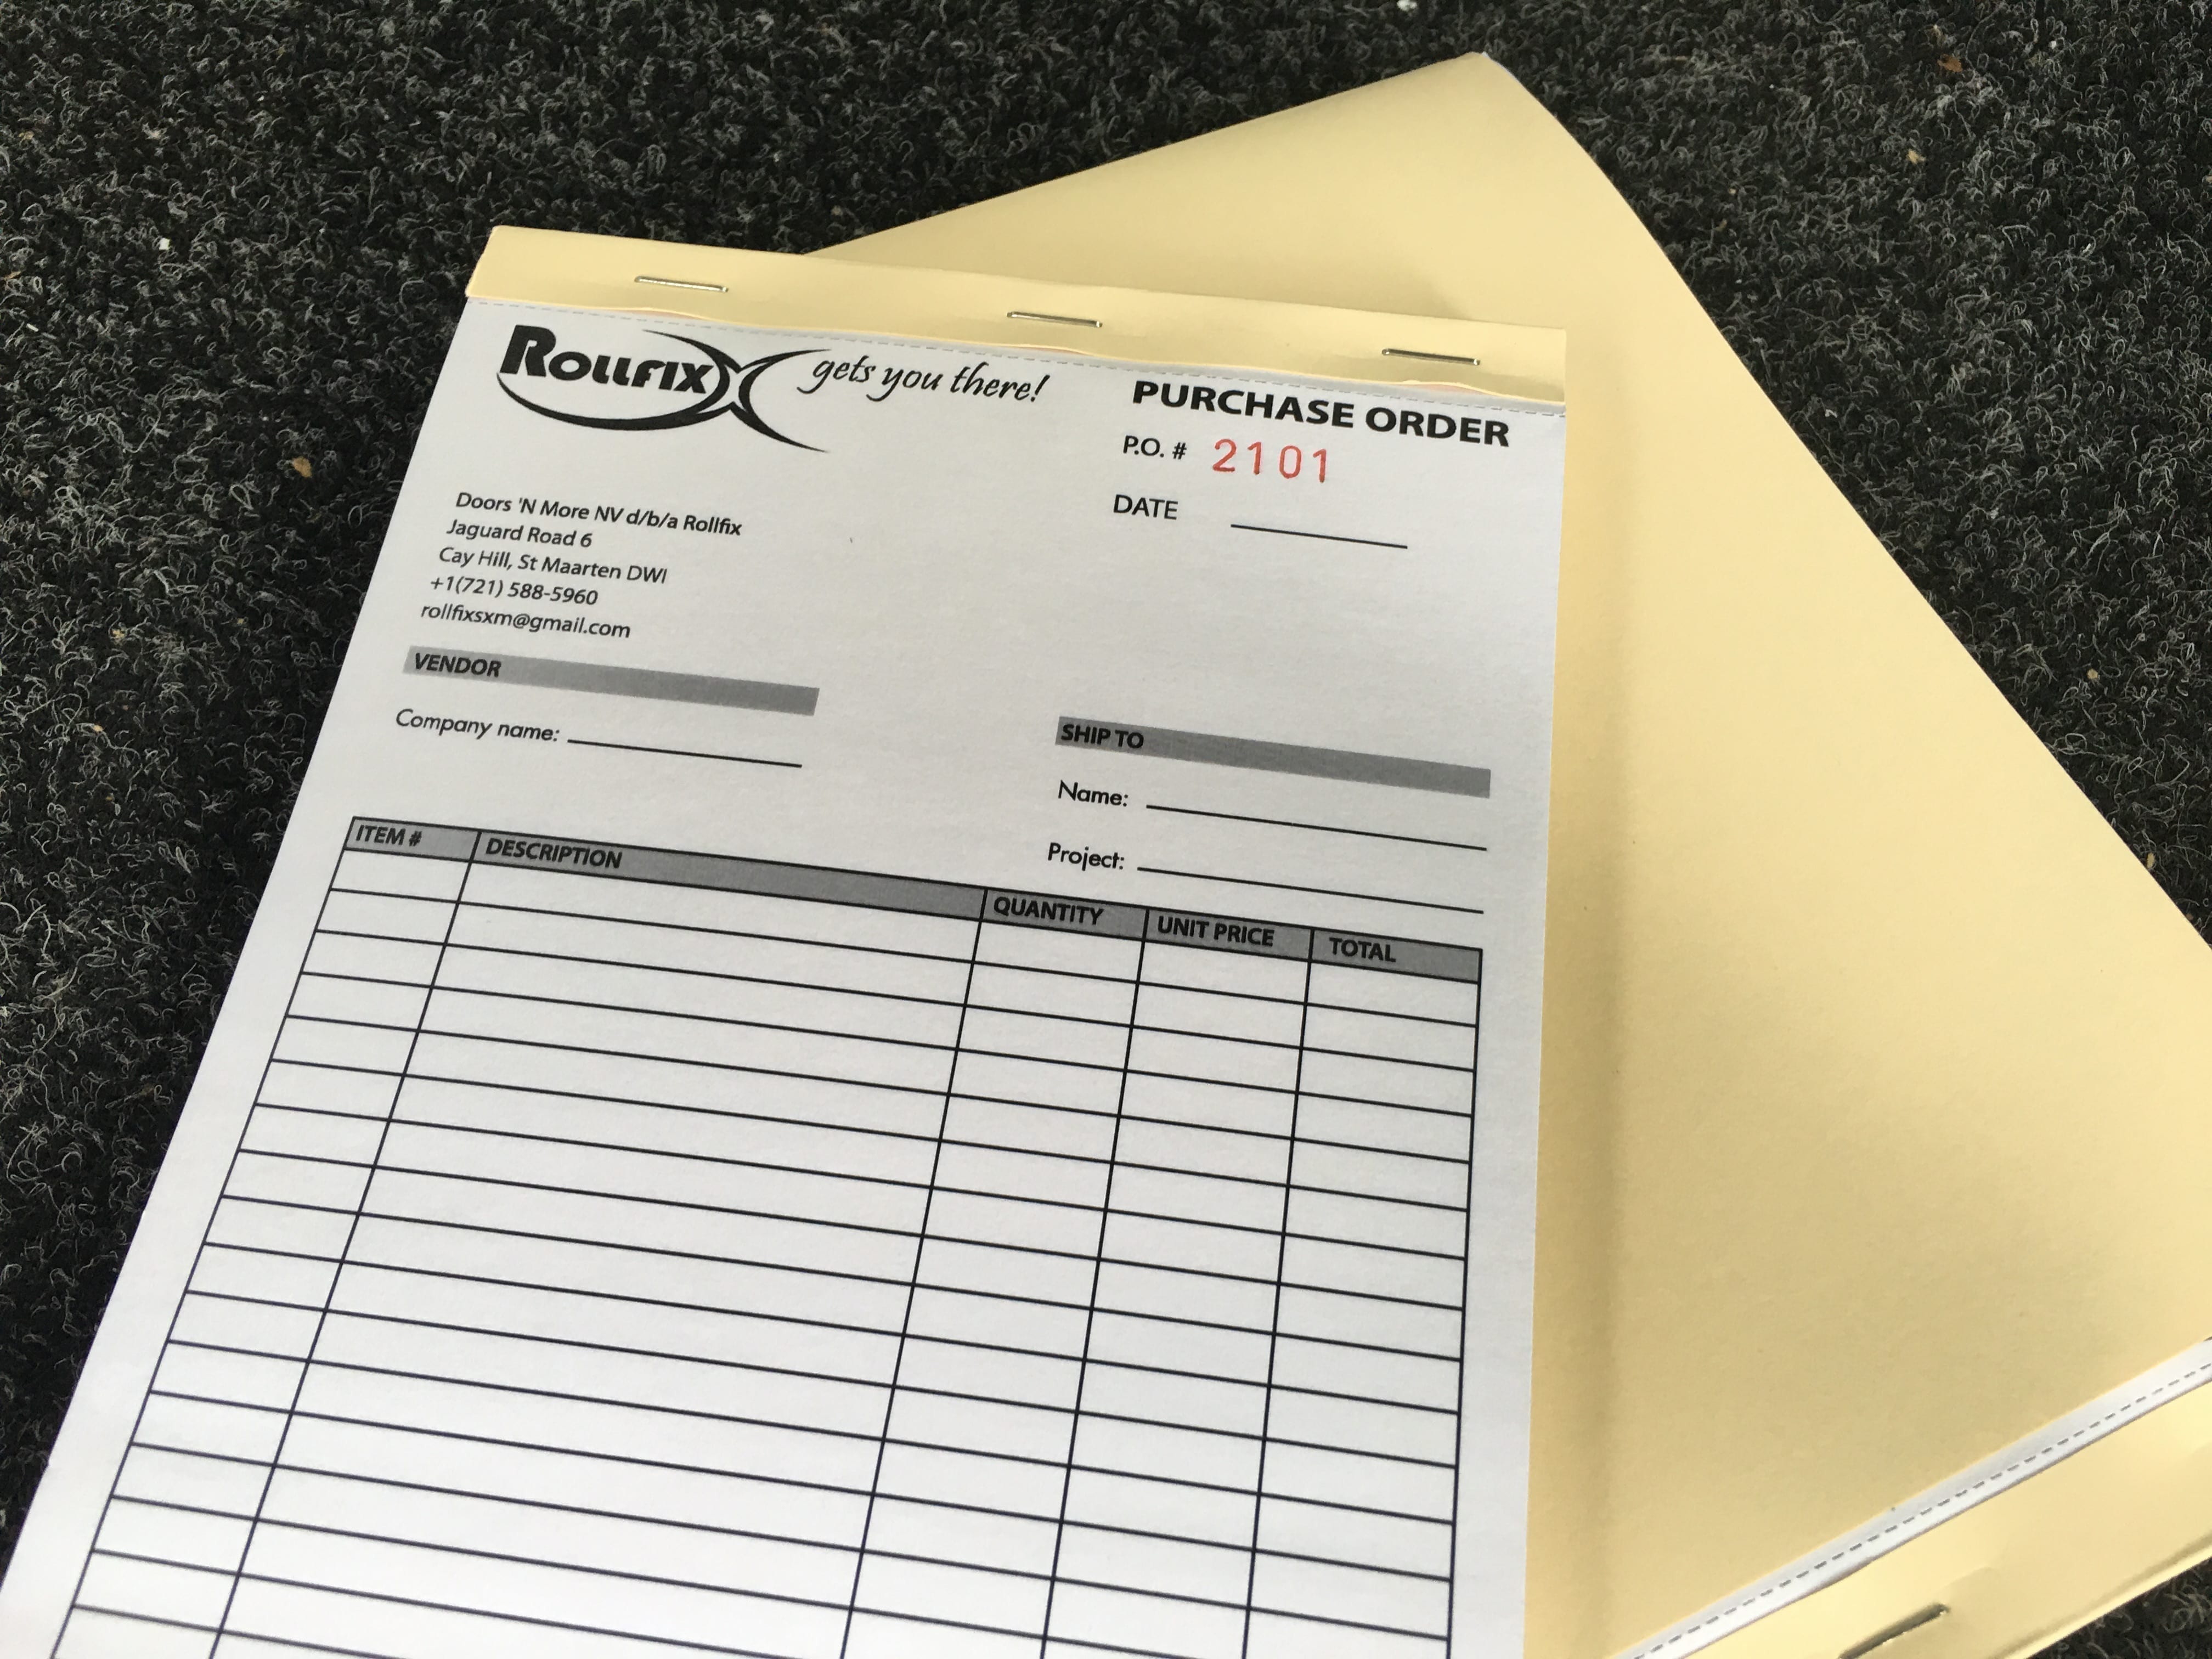 Delivery Notes Purchase Orders Invoice Books Personalised NCR Receipts 